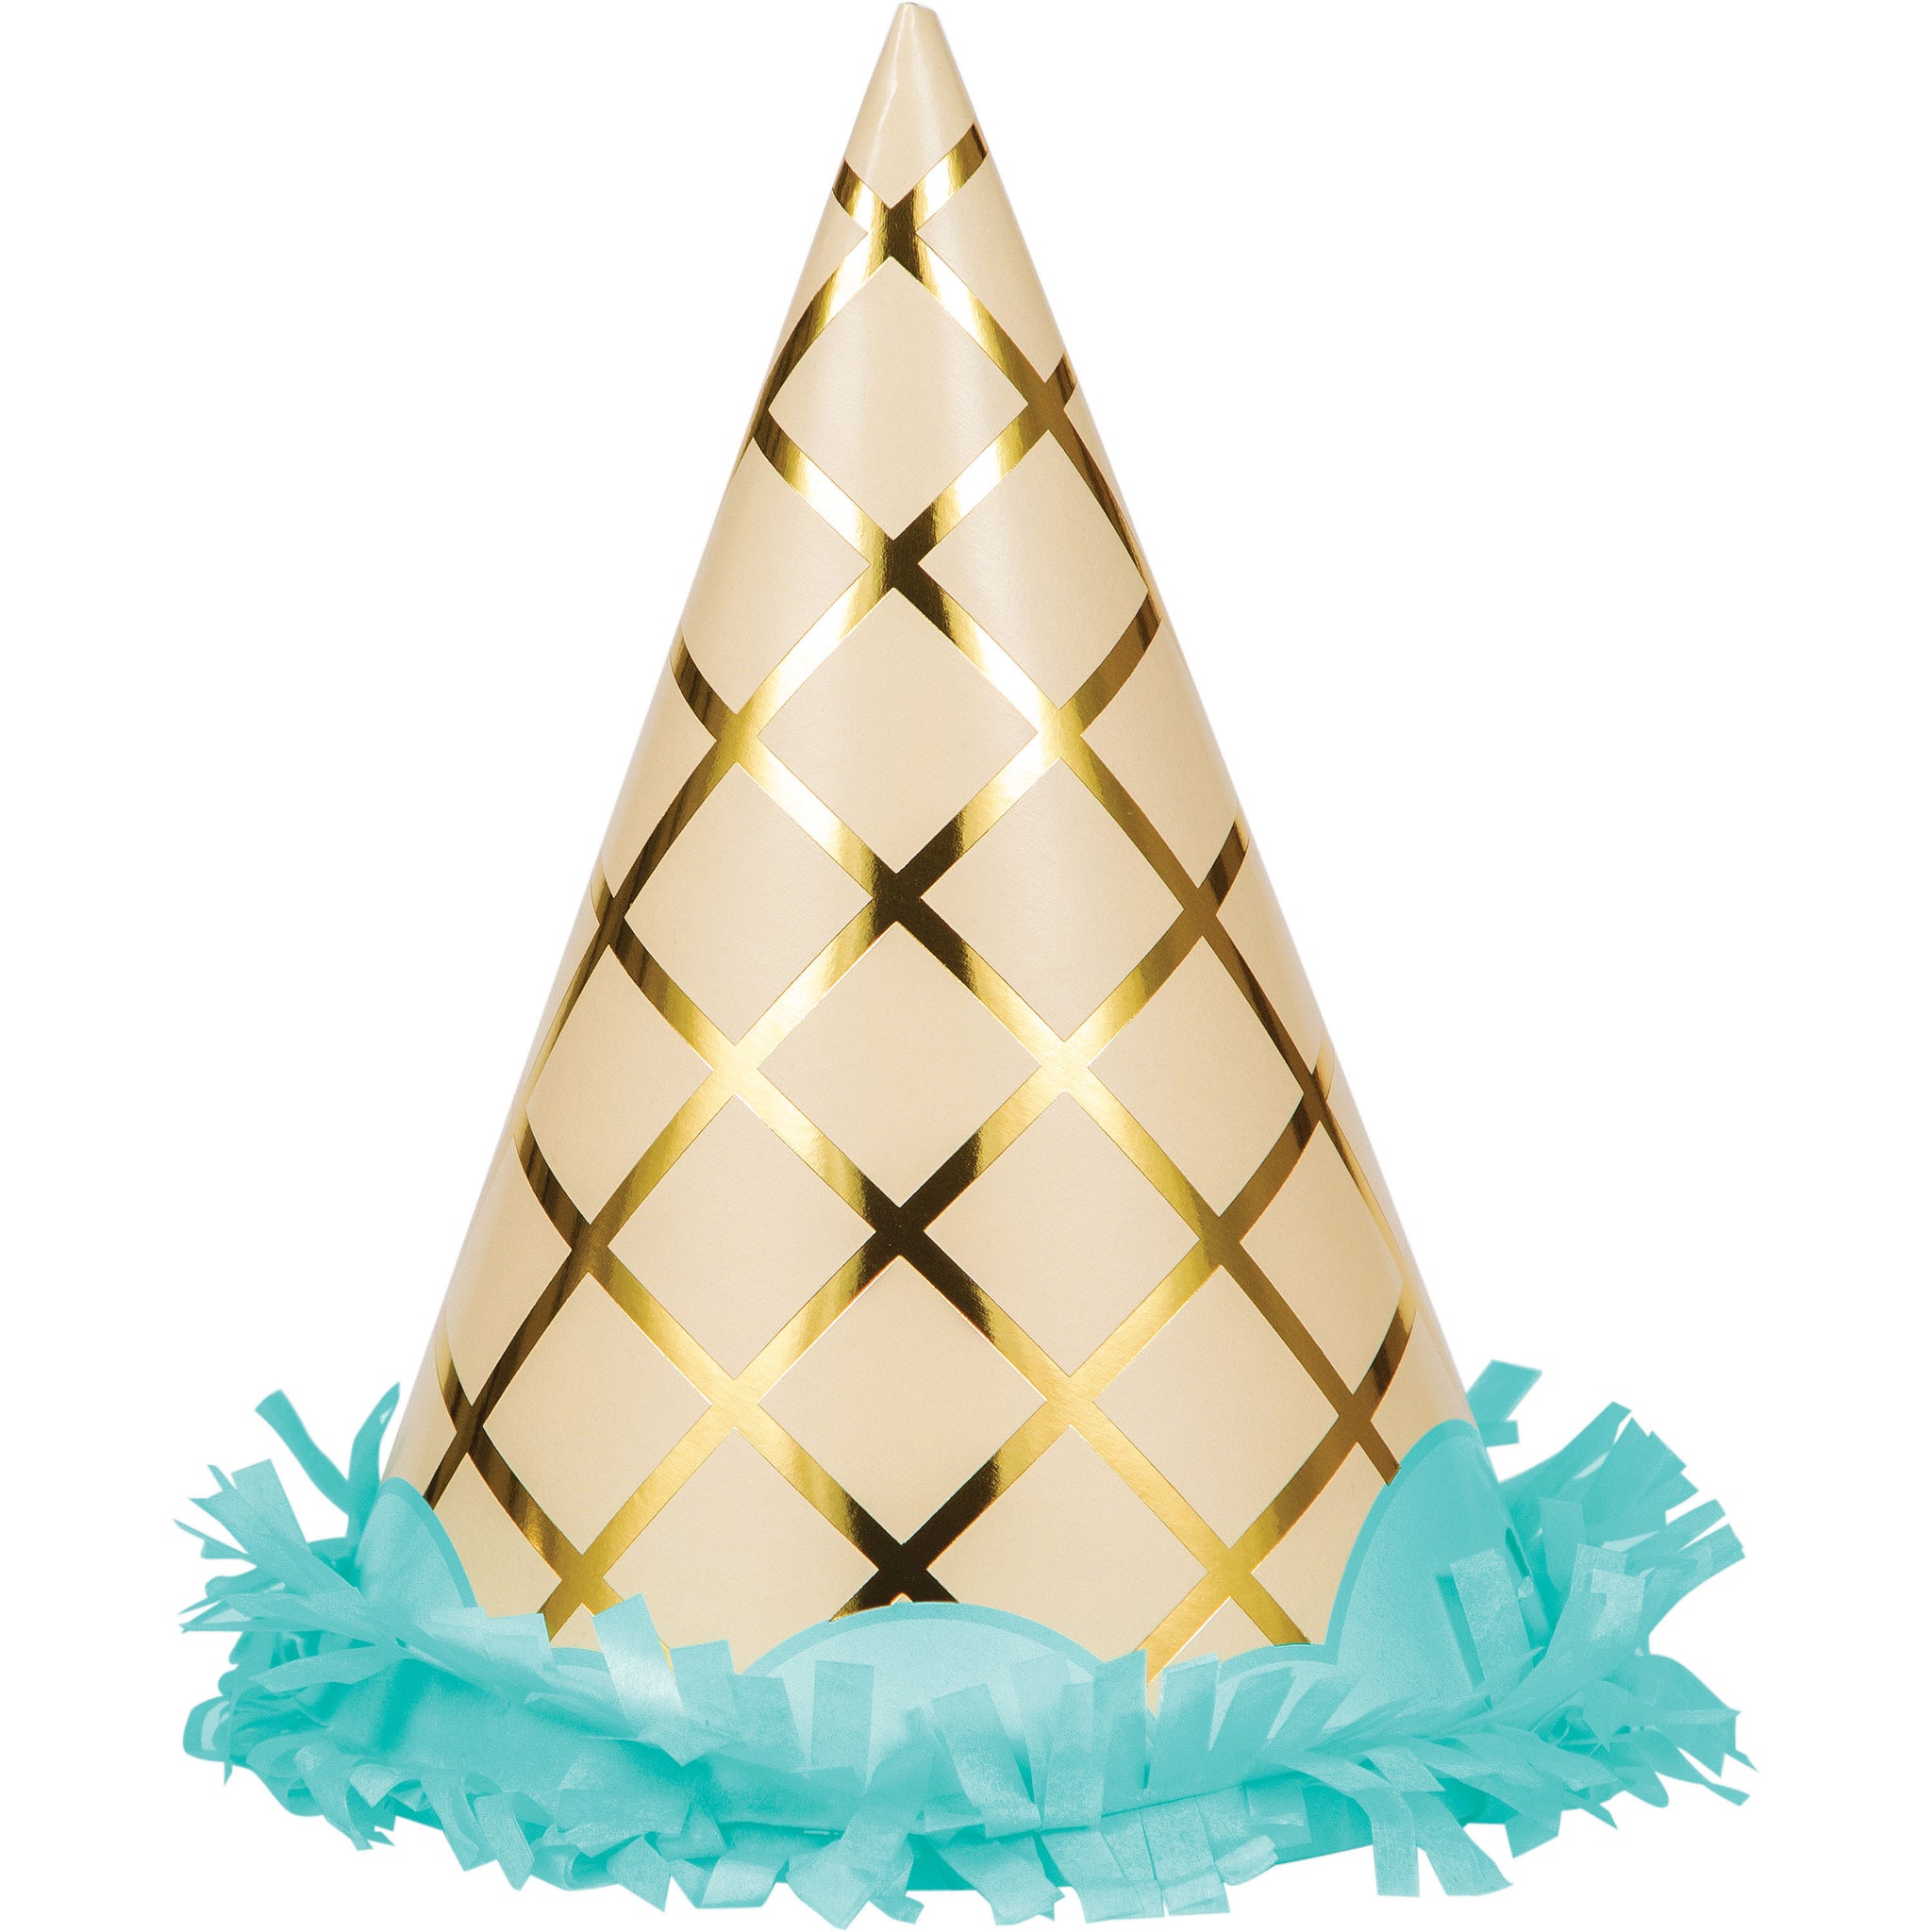 Ice Cream Assorted Party Hats with Fringe